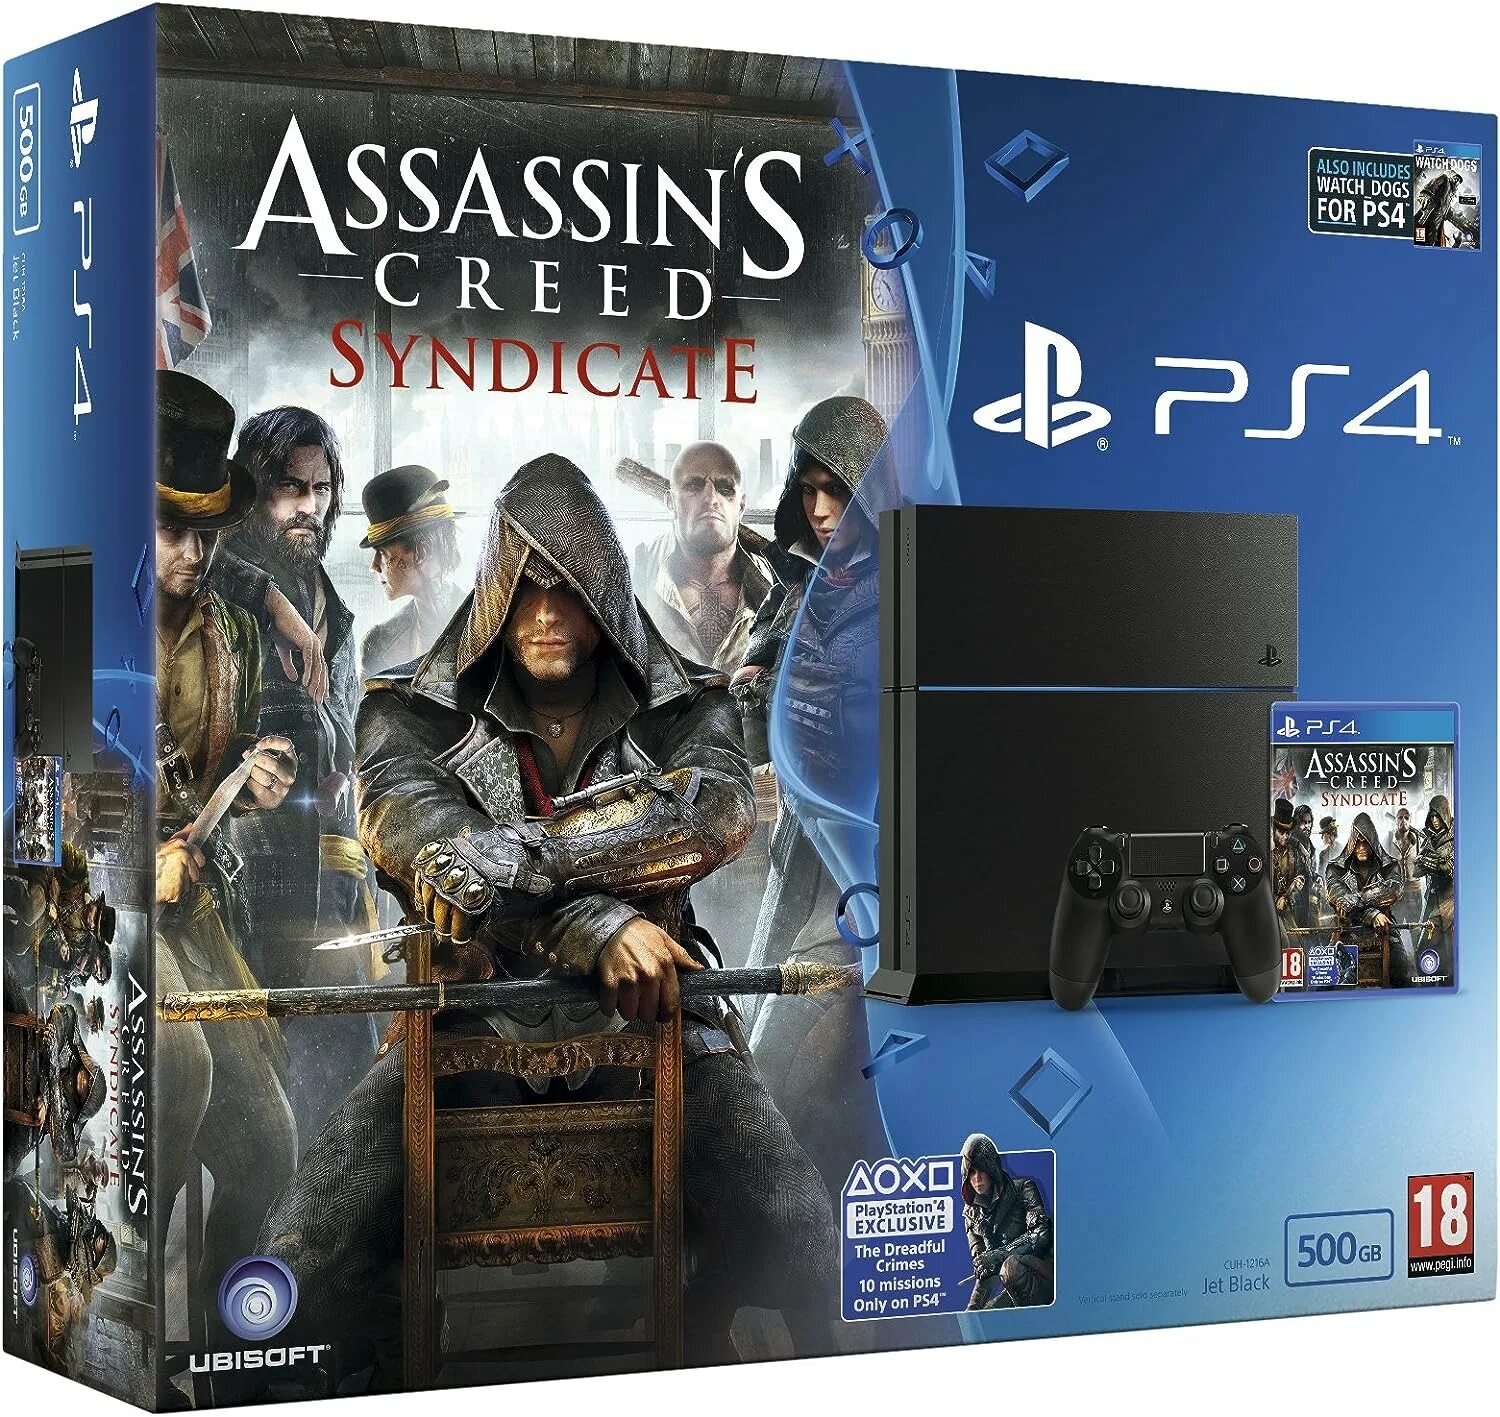 Ps4 диск Assassins Creed 1. PLAYSTATION 4 диски ассасин 2. Ассасин Крид Синдикат диск ПС 4. Assassin's Creed Синдикат ps4 диск.